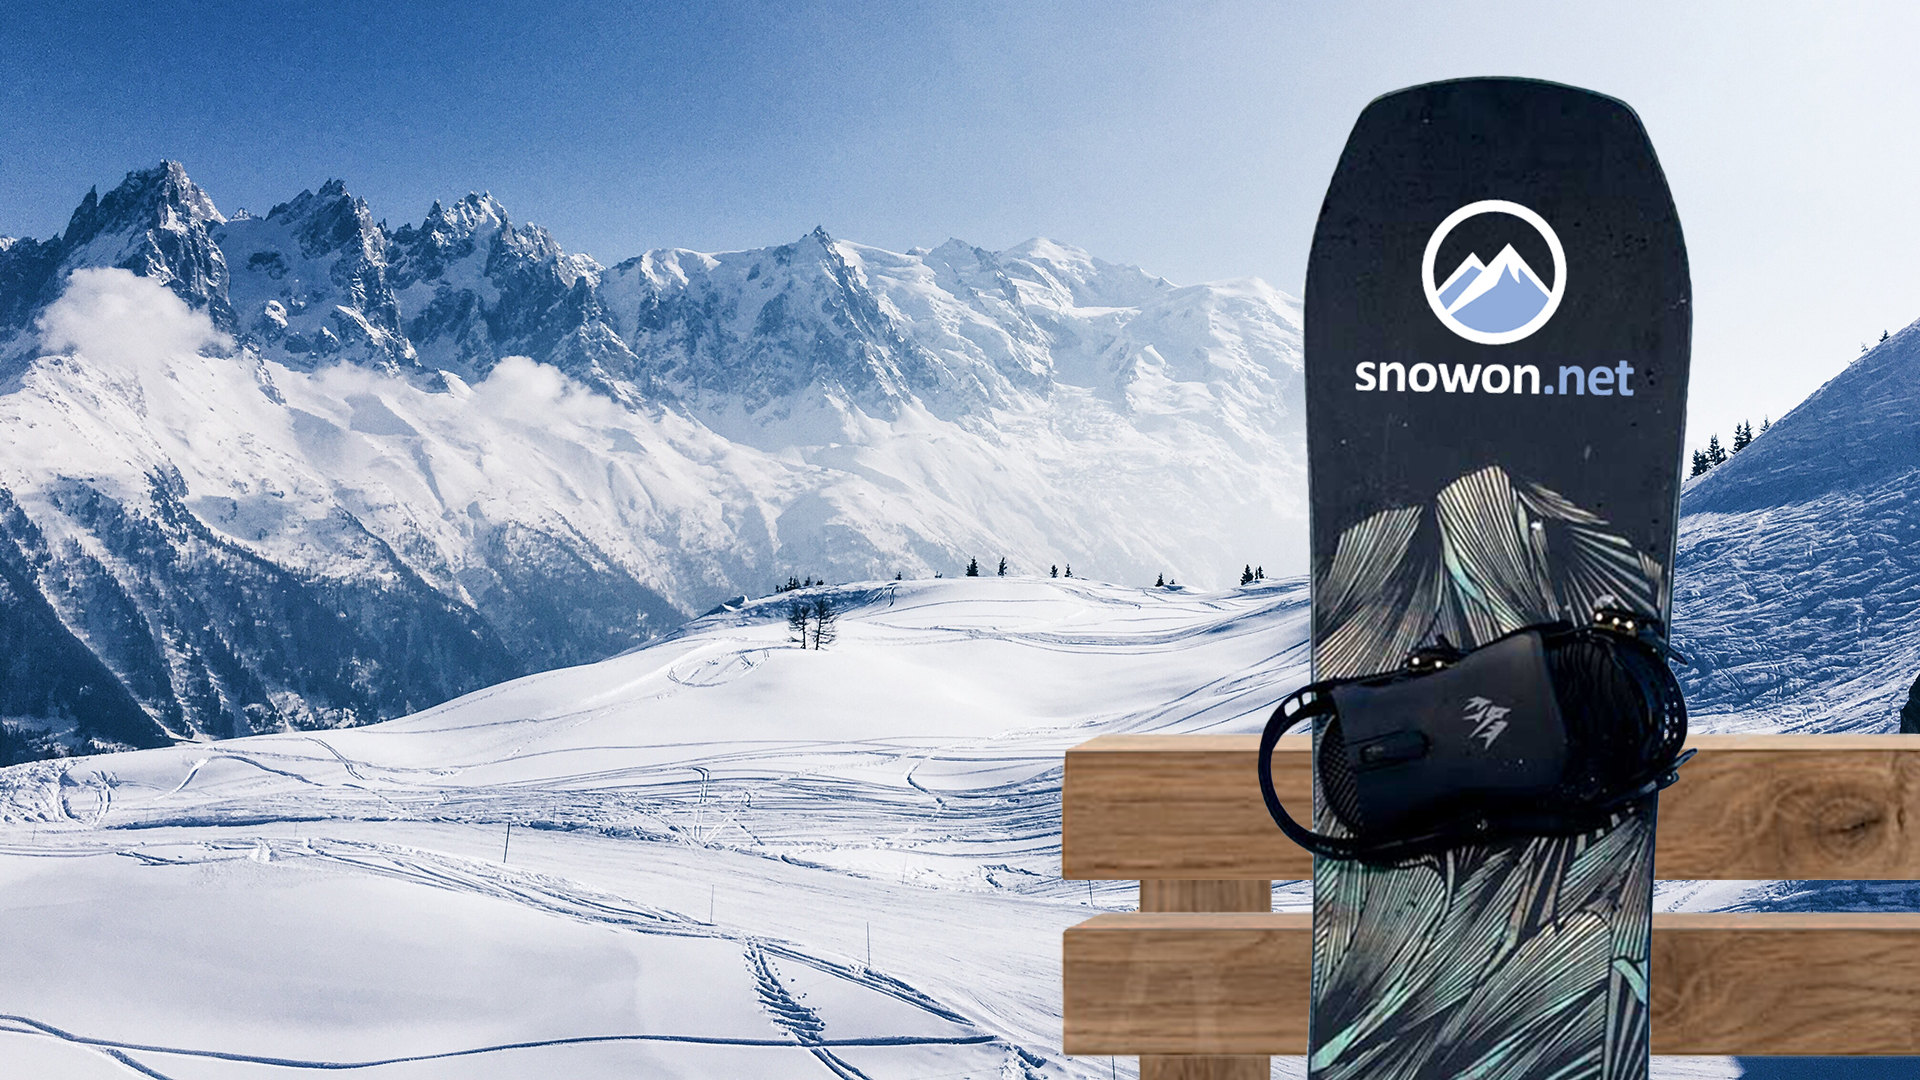 Snowboarding in the mountains. Virtual background to use on Zoom, Microsoft Teams, Skype, Google Meet, WebEx or any other compatible app.